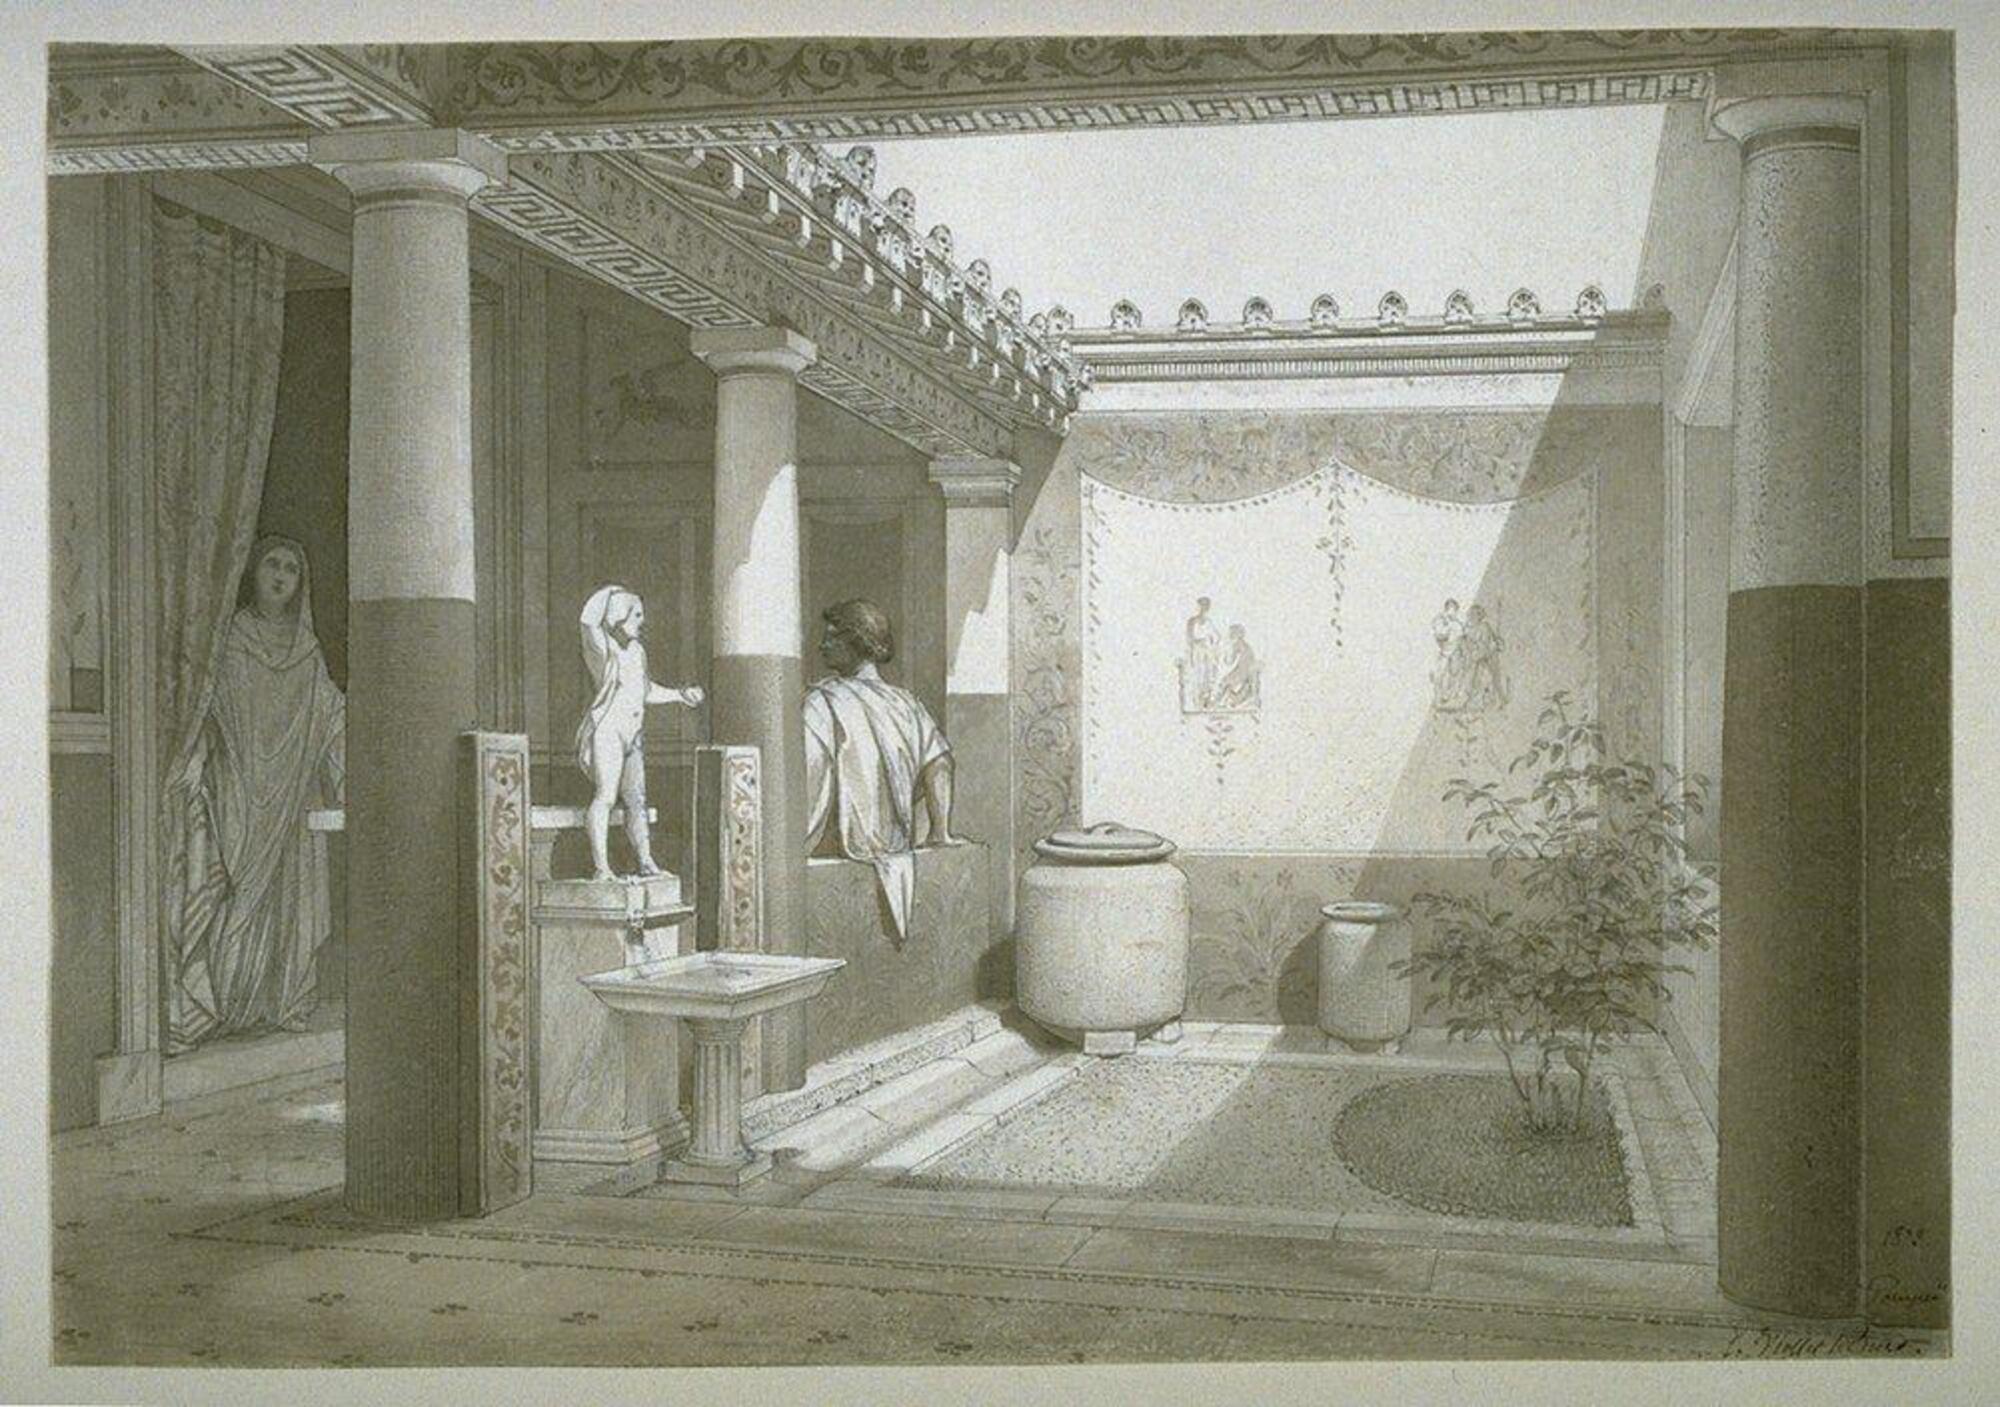 An ink drawing in shades of gray with very exact detailing of objects and architectural elements in the scene. It shows the interior of a Roman house with sunlight streaming into an open courtyard with a fountain. The stone fountain has a square basin supported by a pedestal and a standing nude sculpture above it. One wall of the courtyard is decorated with floral designs and two figural scenes. A small bush is growing in a dirt area of the floor and there are two large vessels against the wall. Two figures are standing in a colonnade to the left of the courtyard. One is a woman dressed in a toga who is looking at a man dressed in a short sleeved tunic. The decorations of the floor, walls and ceiling depict ancient classical designs such as ascanthus leaves, meander and scroll patterns and the roof tiles have floral plume decorations and lion's head spouts.